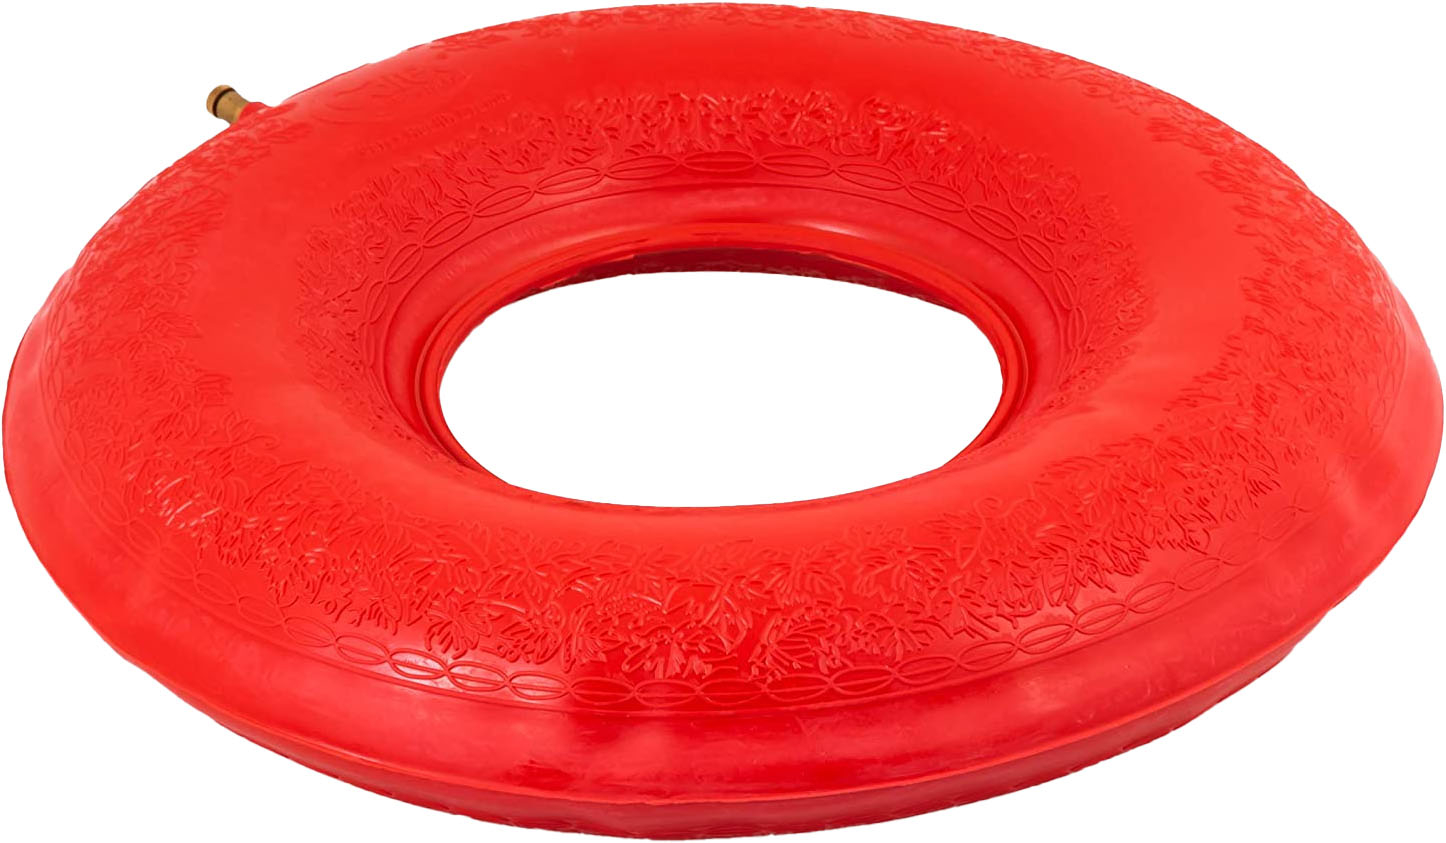 Carex  Inflatable Rubber Ring And Donut Pillow (Red) $6  & More + Free Shipping